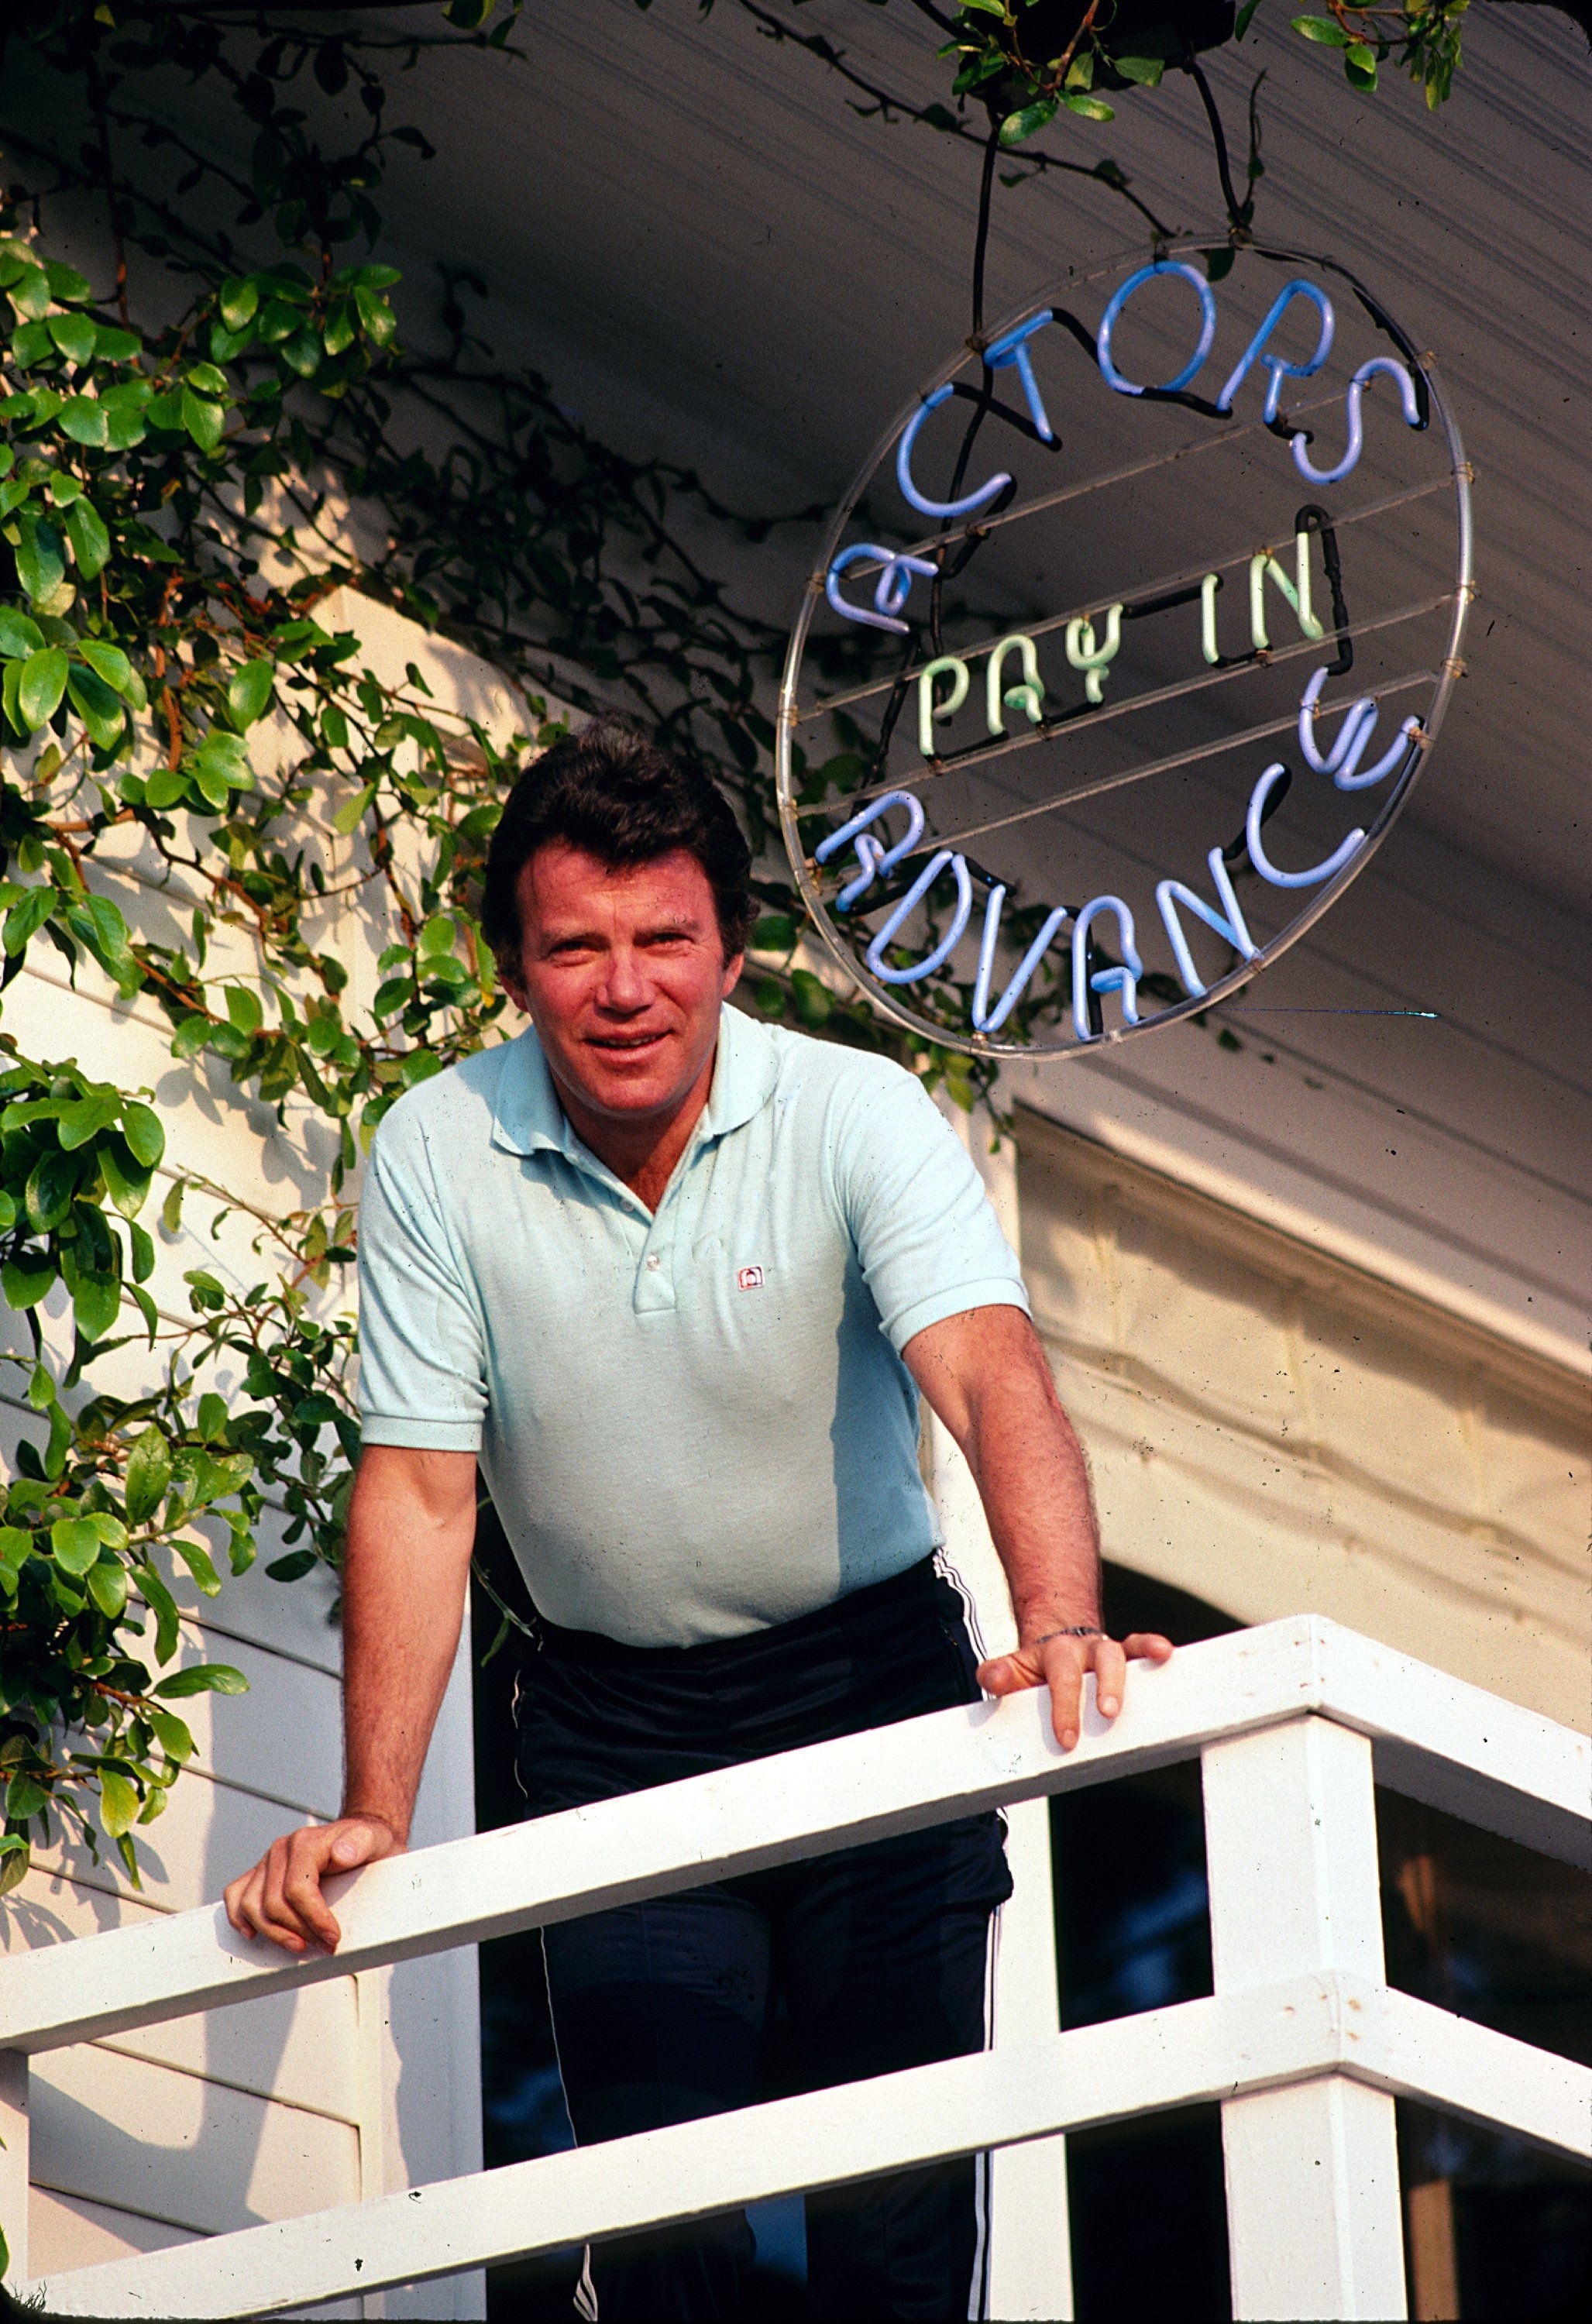 Man leaning on balcony rail below a neon sign that reads &quot;ACTORS PAY IN ADVANCE.&quot;